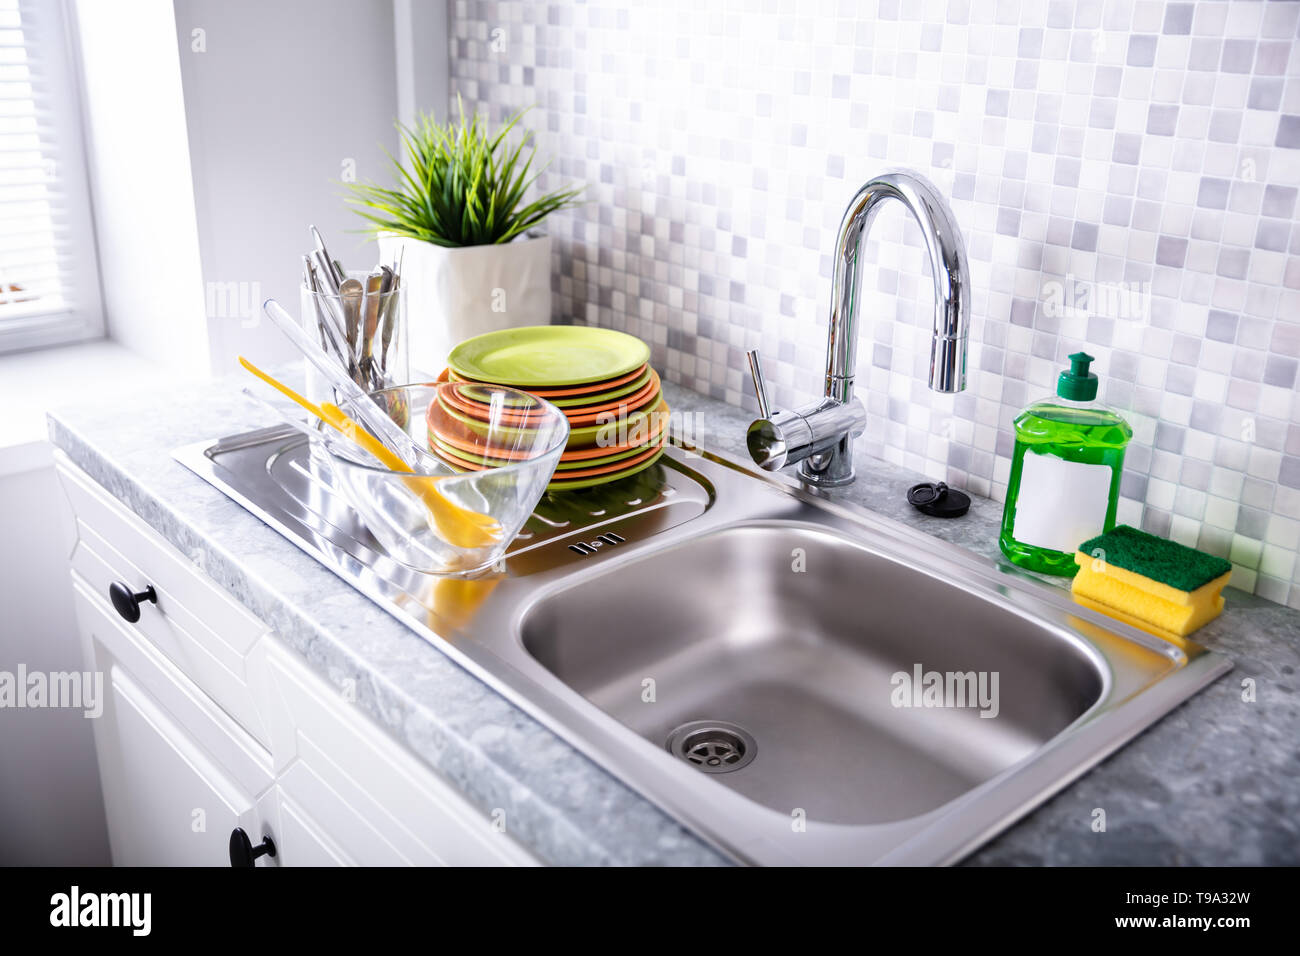 Clean Counter In Kitchen With Utensils At Home Stock Photo